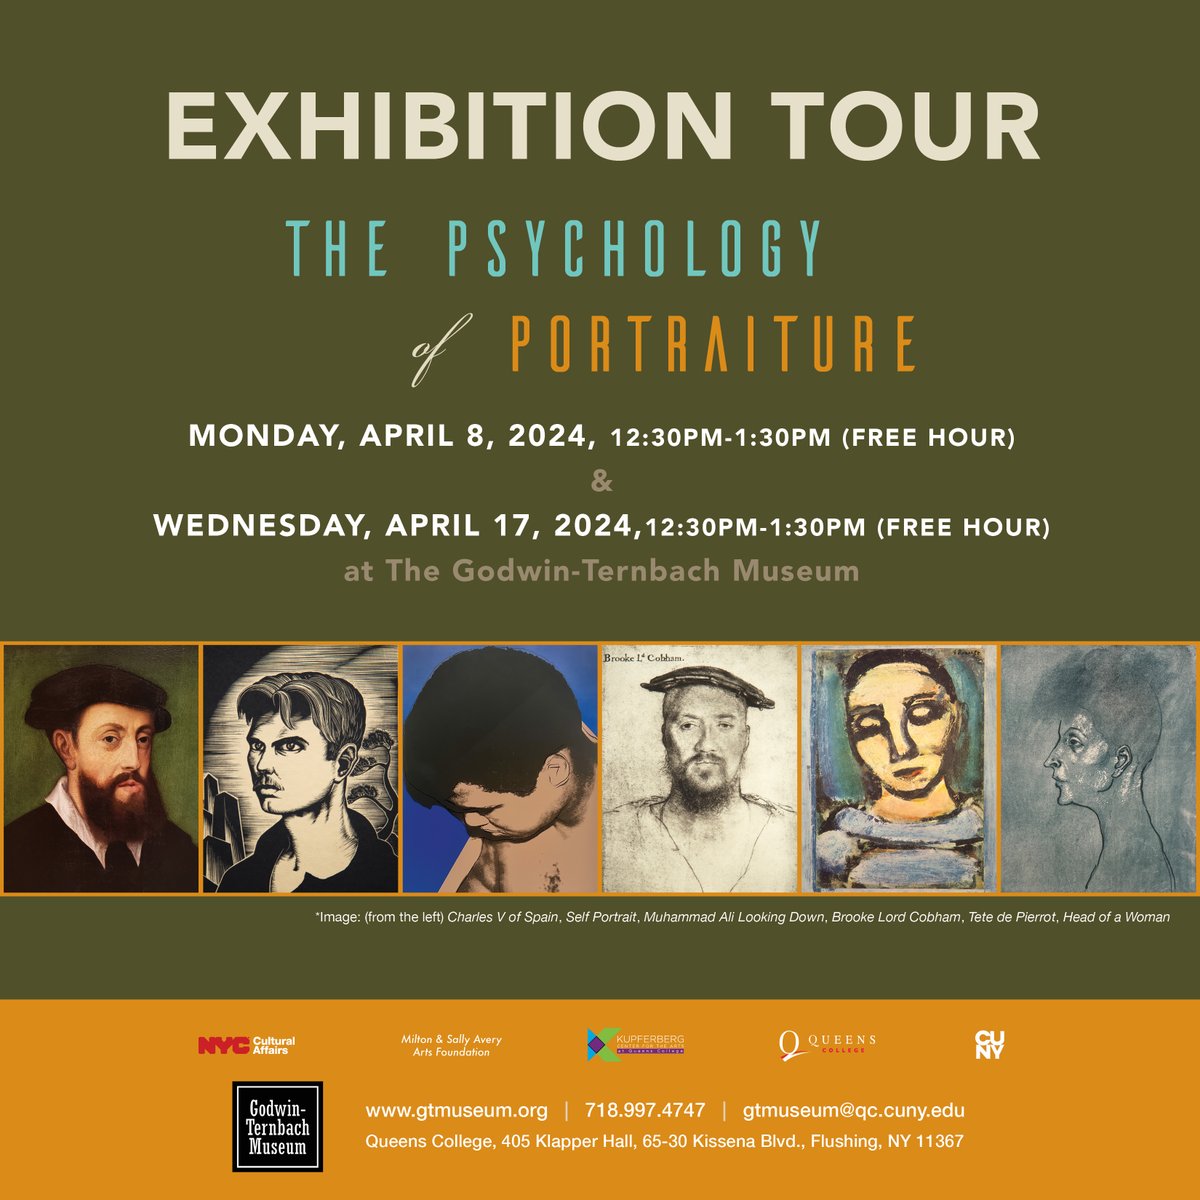 Join us for a tour of the Spring exhibition, 'The Psychology of Portraiture', at the Godwin-Ternbach Museum on Monday, April 8, 2024, 12:30pm-1:30pm or Wednesday, April 17, 2024,12:30pm-1:30pm! #GTM #ThePsychologyofPortraiture #ArtExhibition #godwinternbachmuseum #KCA #CUNY